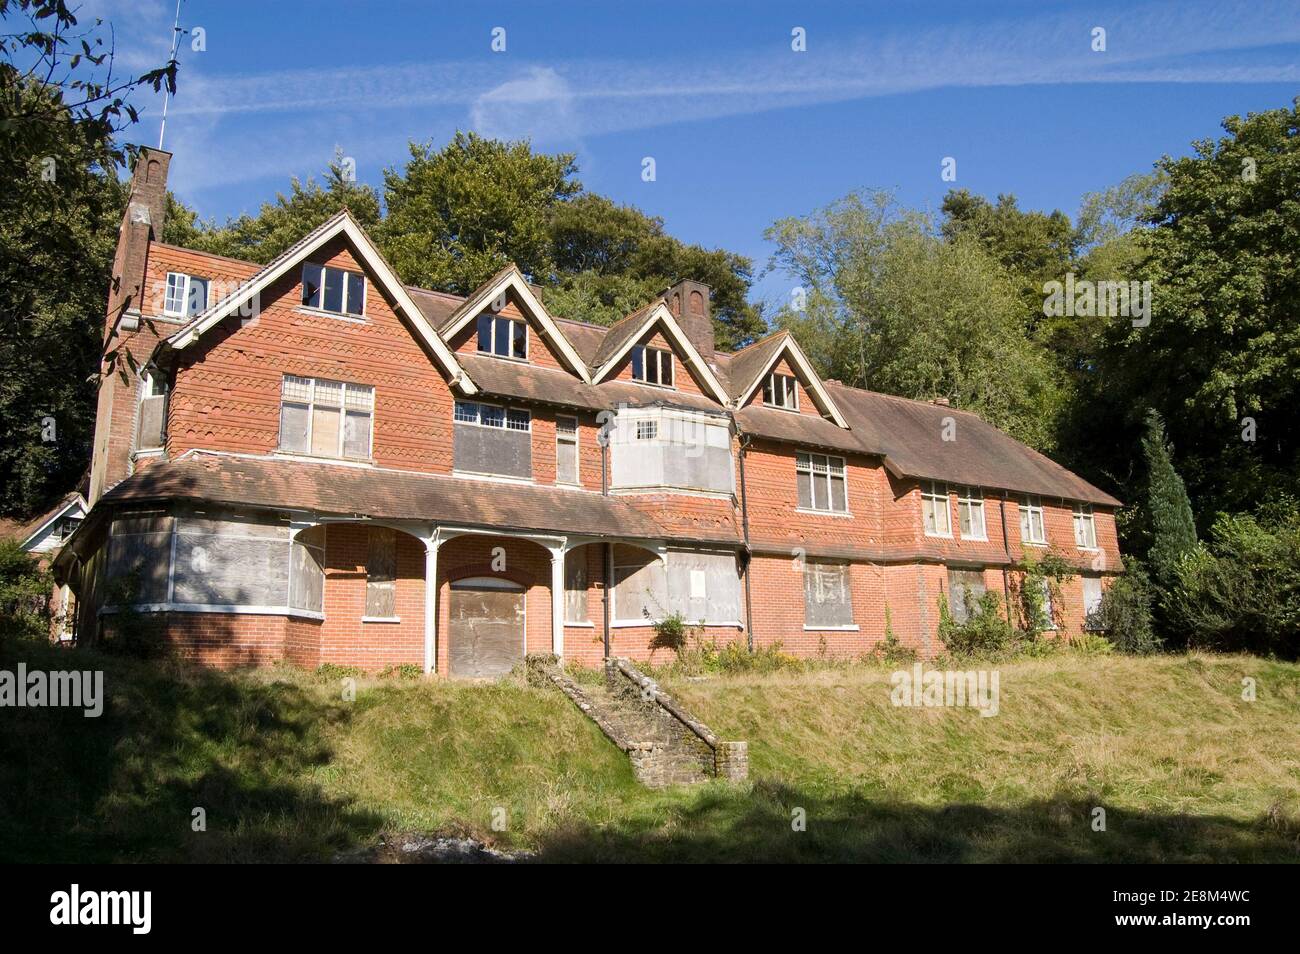 Undershaw, the historic home of Sherlock Holmes author Arthur Conan Doyle in Hindhead, Surrey. The now abandoned building was where he wrote The Hound Stock Photo